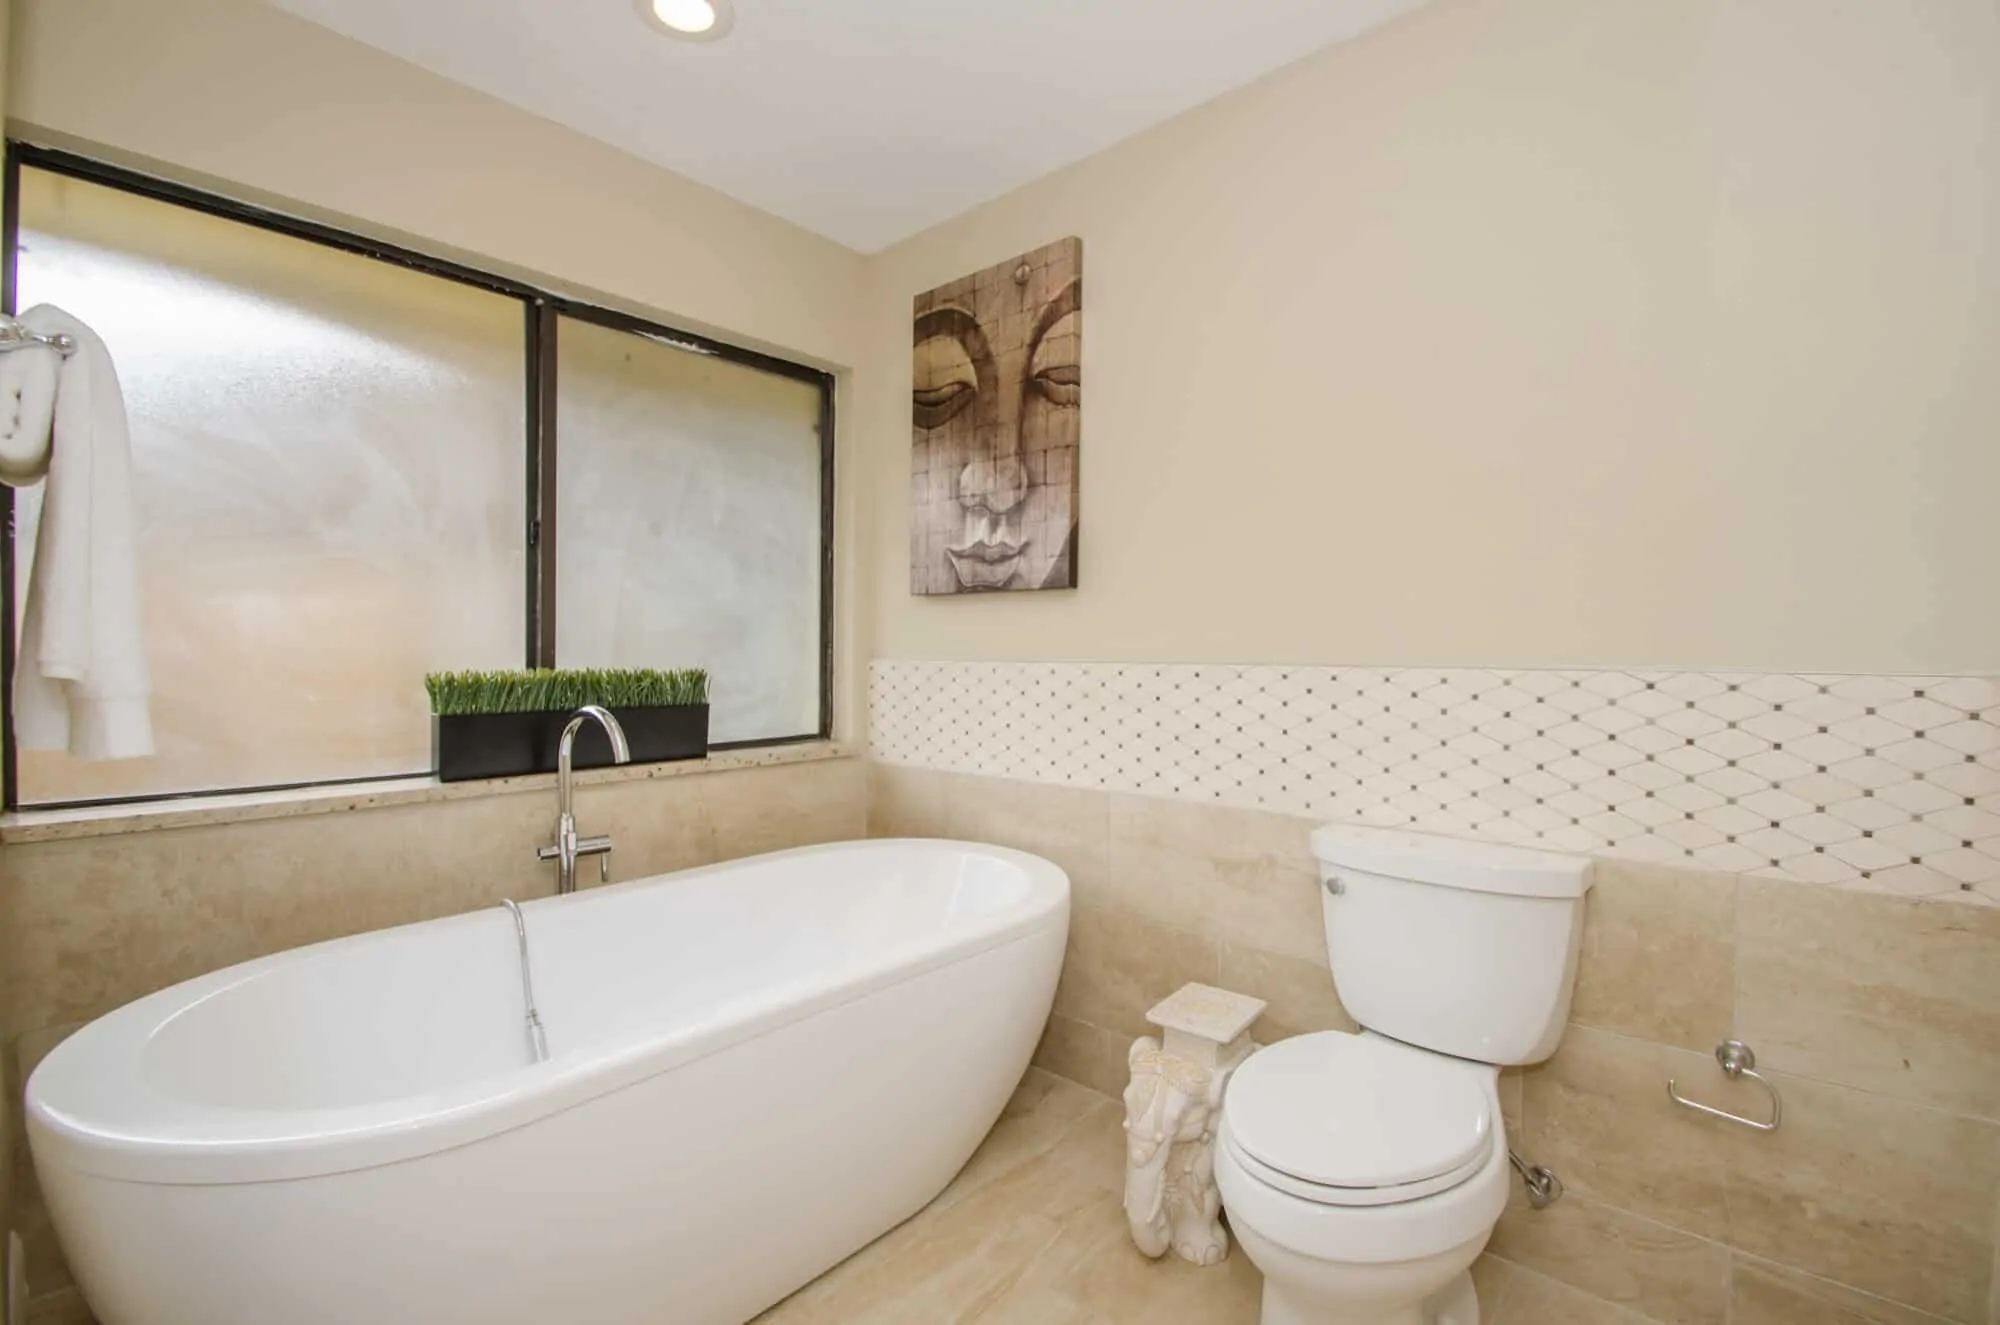 Bath remodel featuring free standing tub